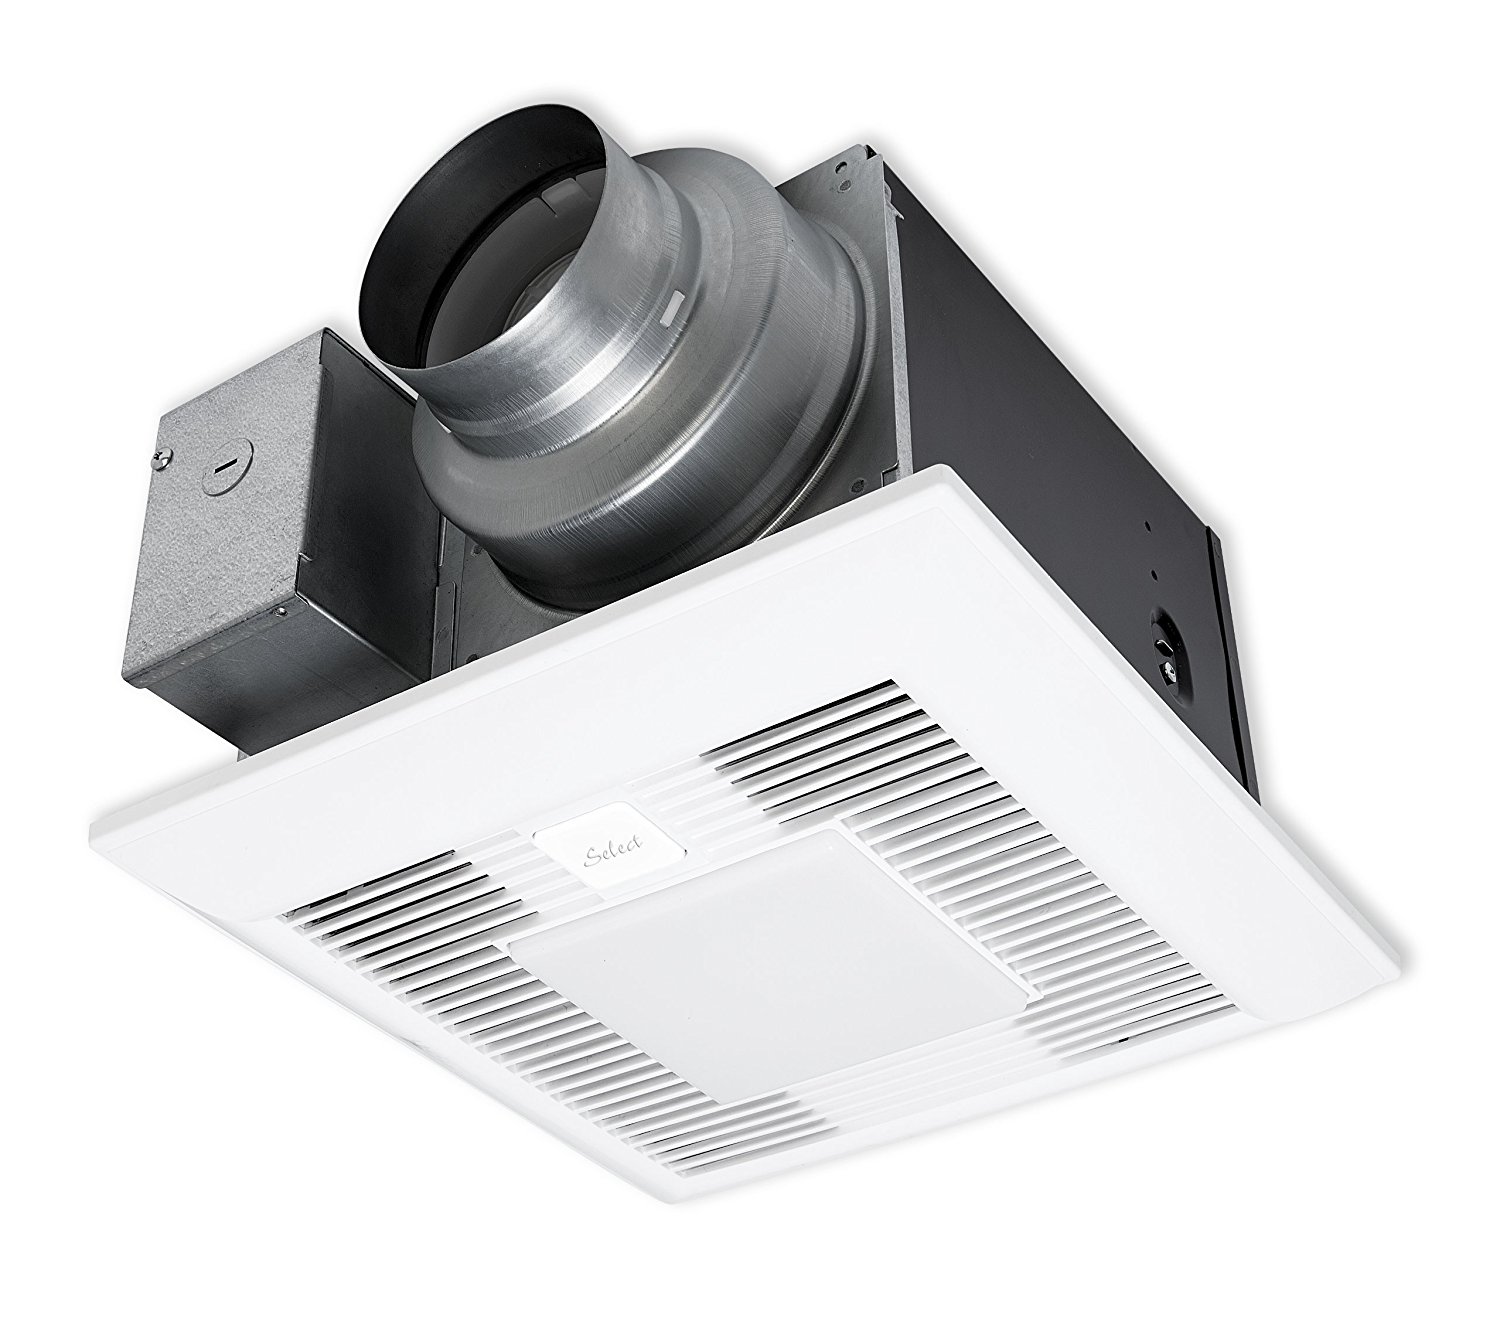 WhisperGreenSelect Customizable Multi-Speed Ventilation Fan/Light Combination (110-130-150), extremely Quiet, Long Lasting, Easy to Install, 6" opening, Code Compliant, Energy Star Certified, White